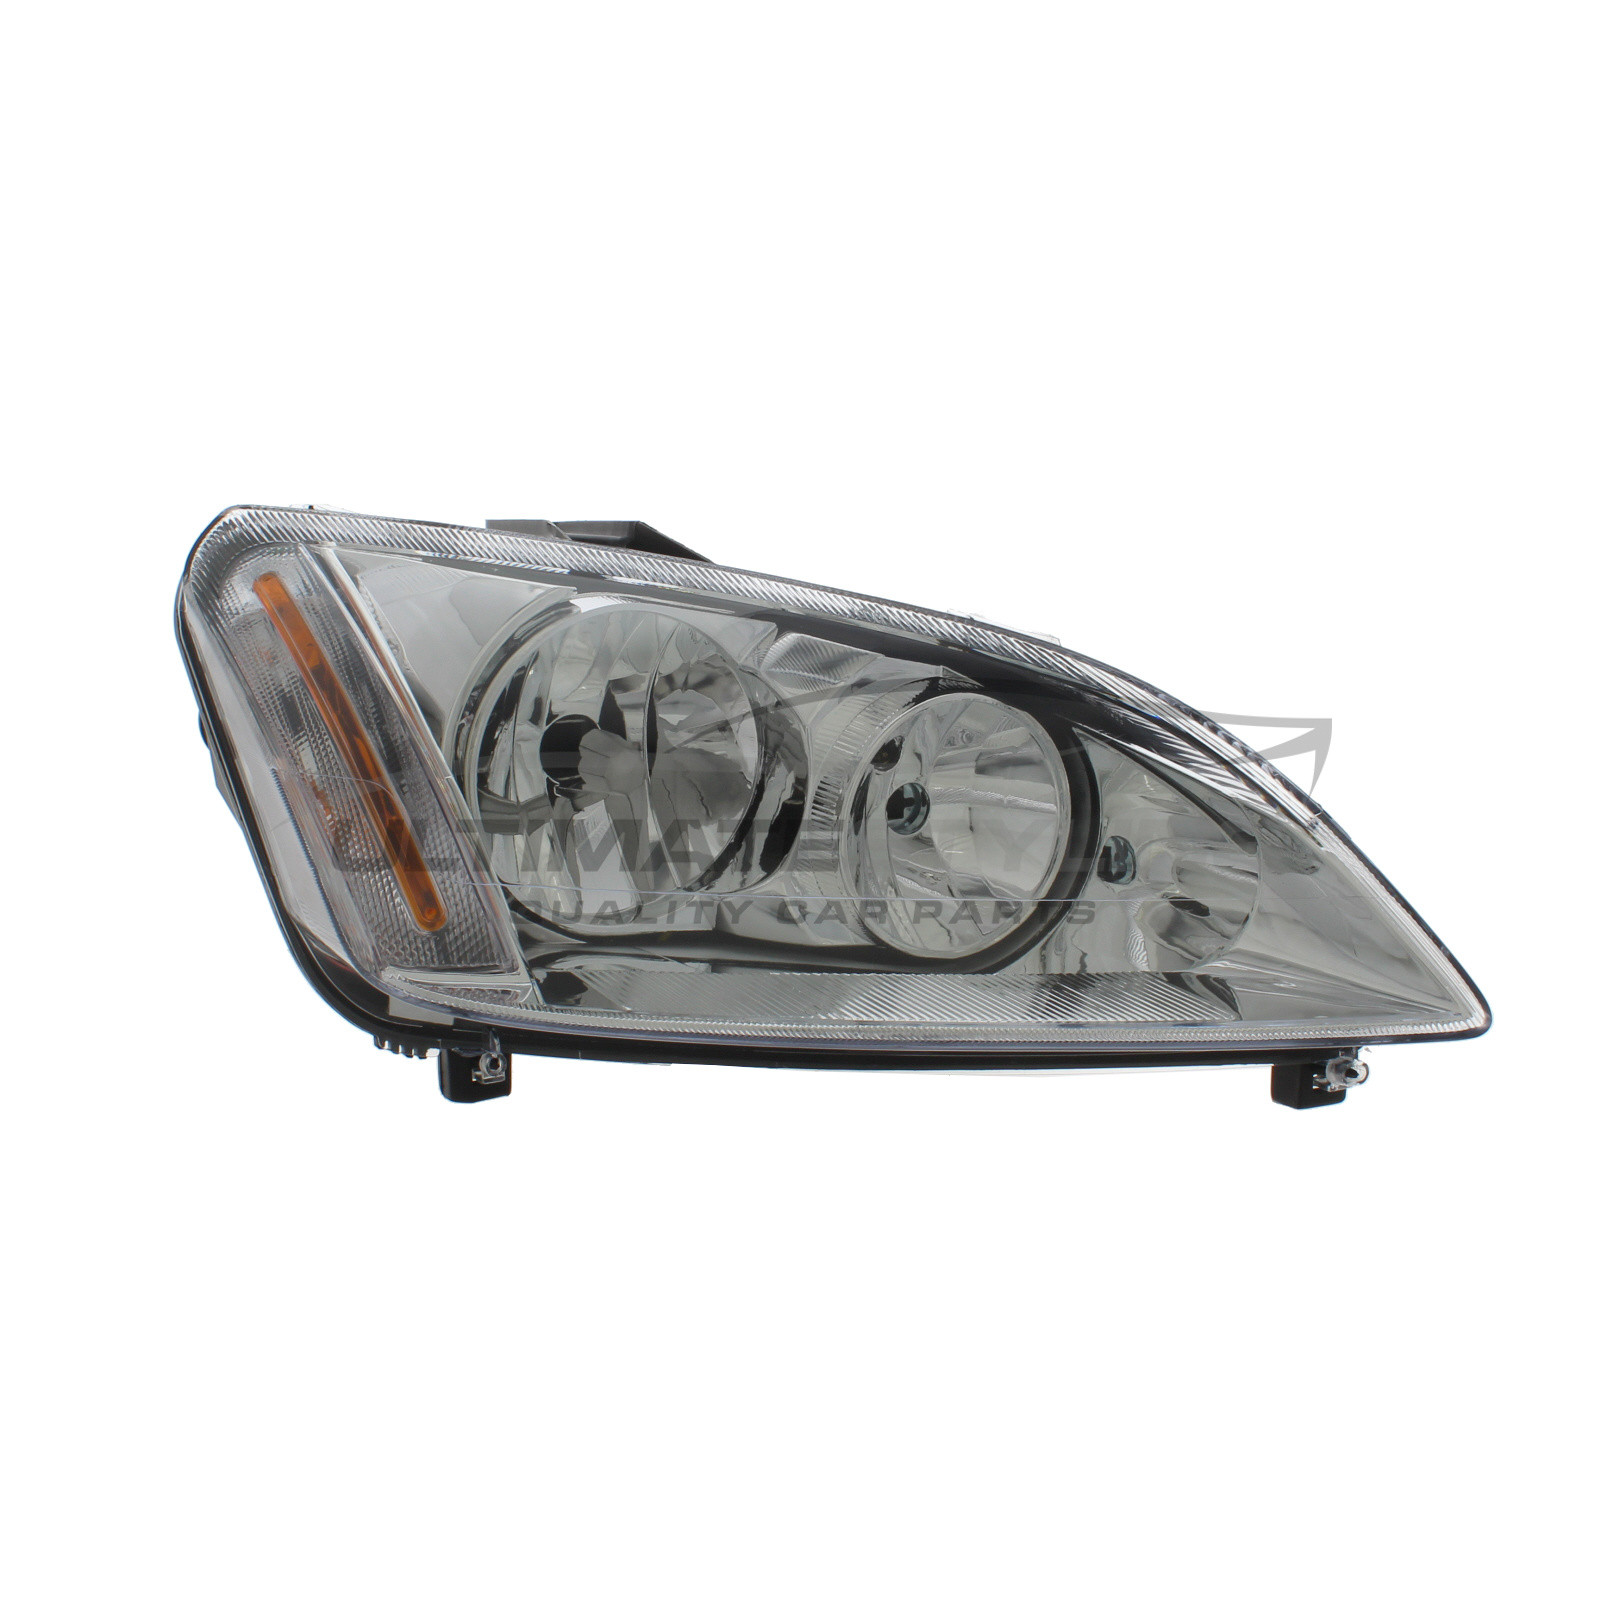 Ford Focus C-MAX 2003-2007 Halogen, Electric Without Motor, Chrome Headlight / Headlamp Drivers Side (RH)